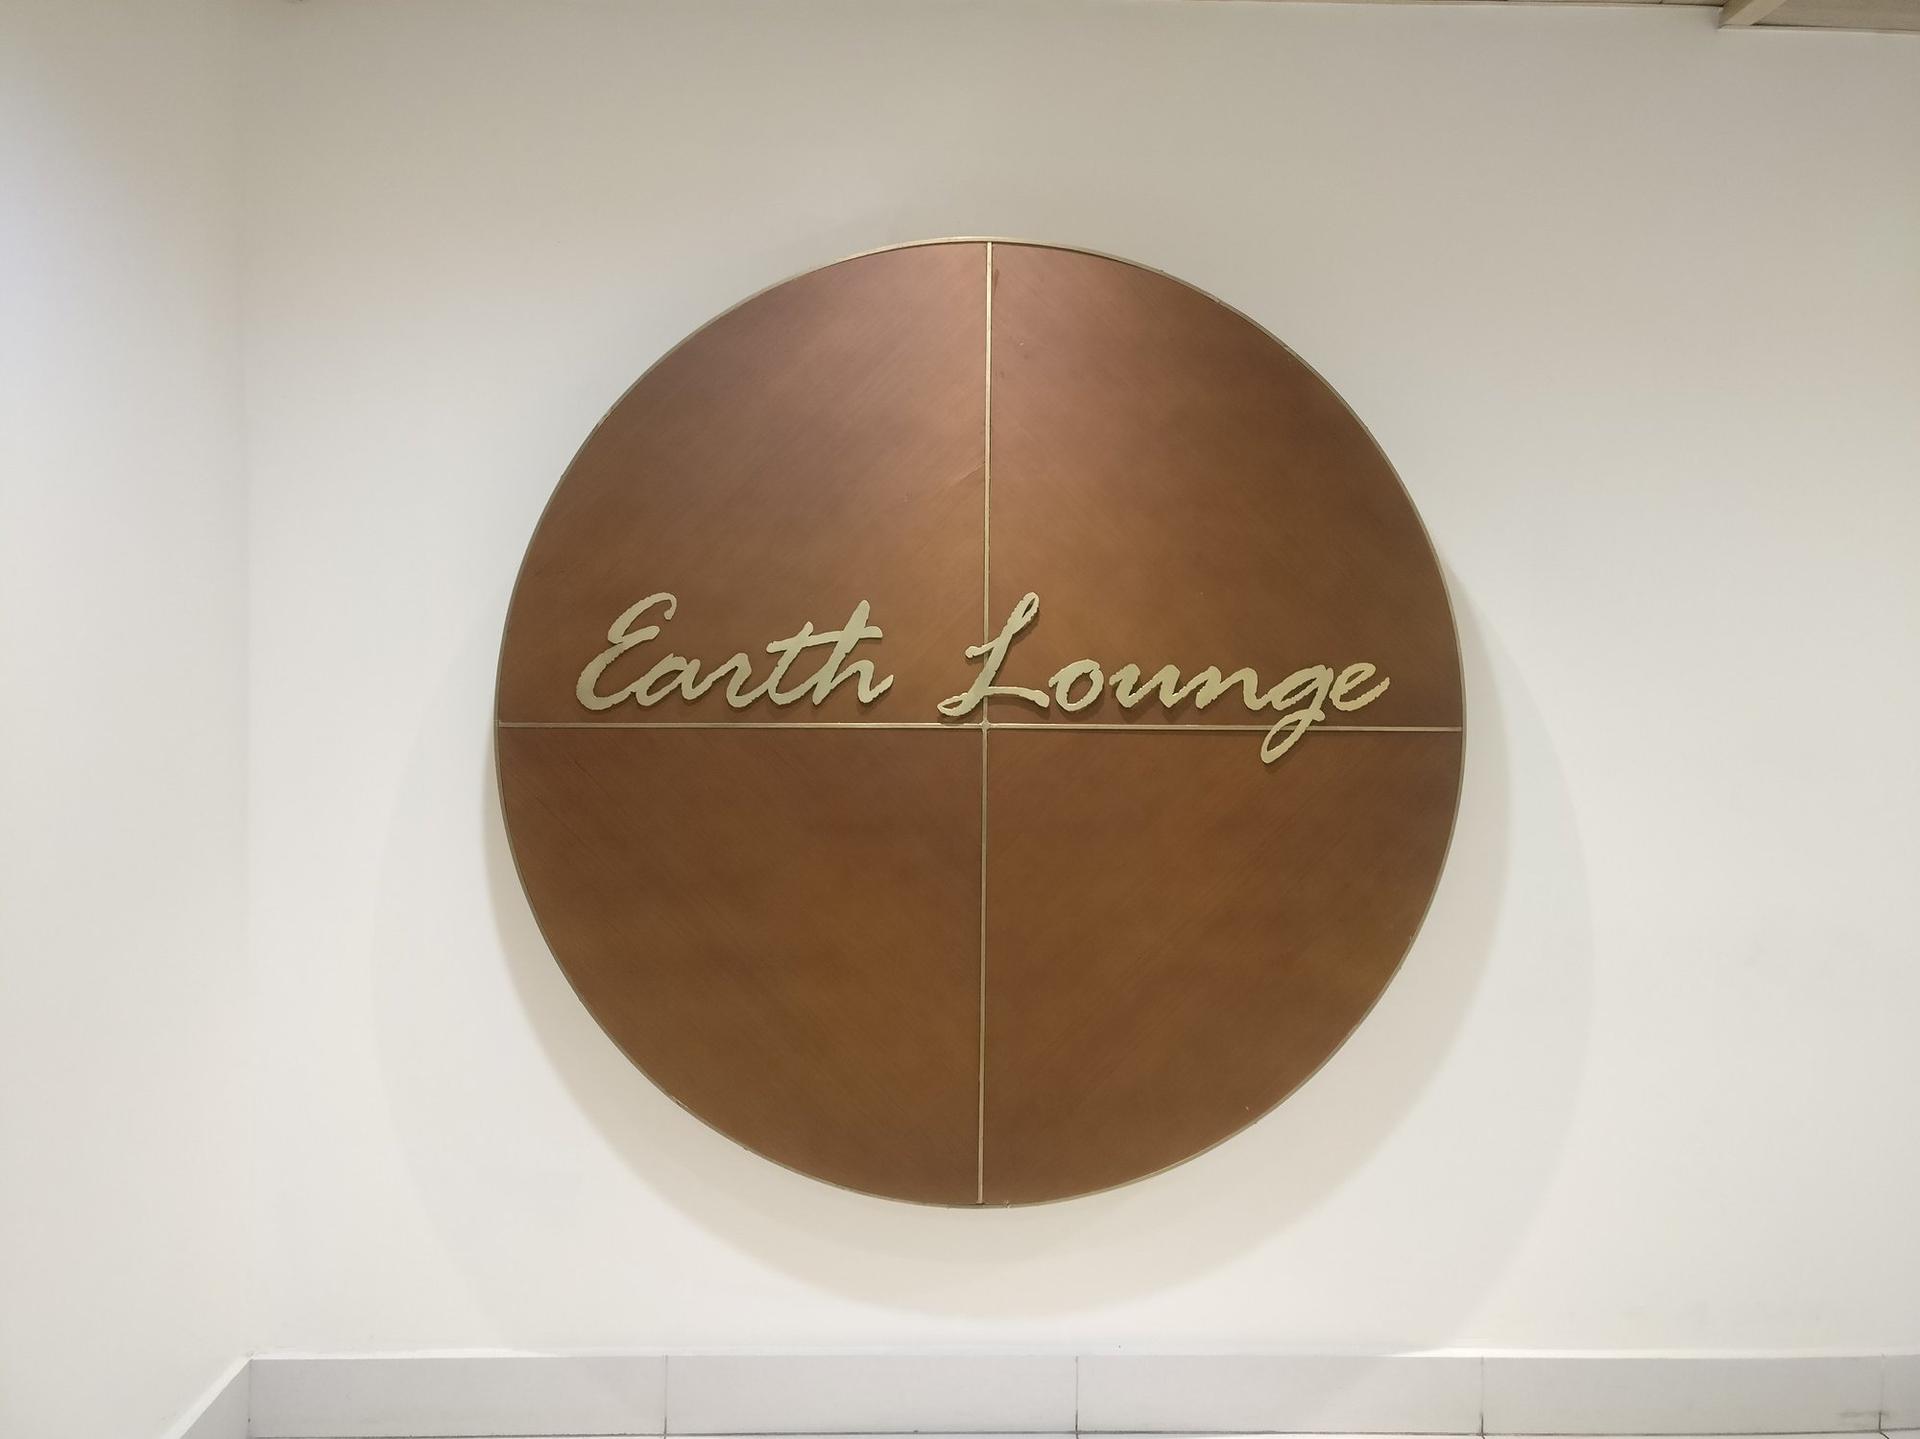 CAFS Earth Lounge image 21 of 35